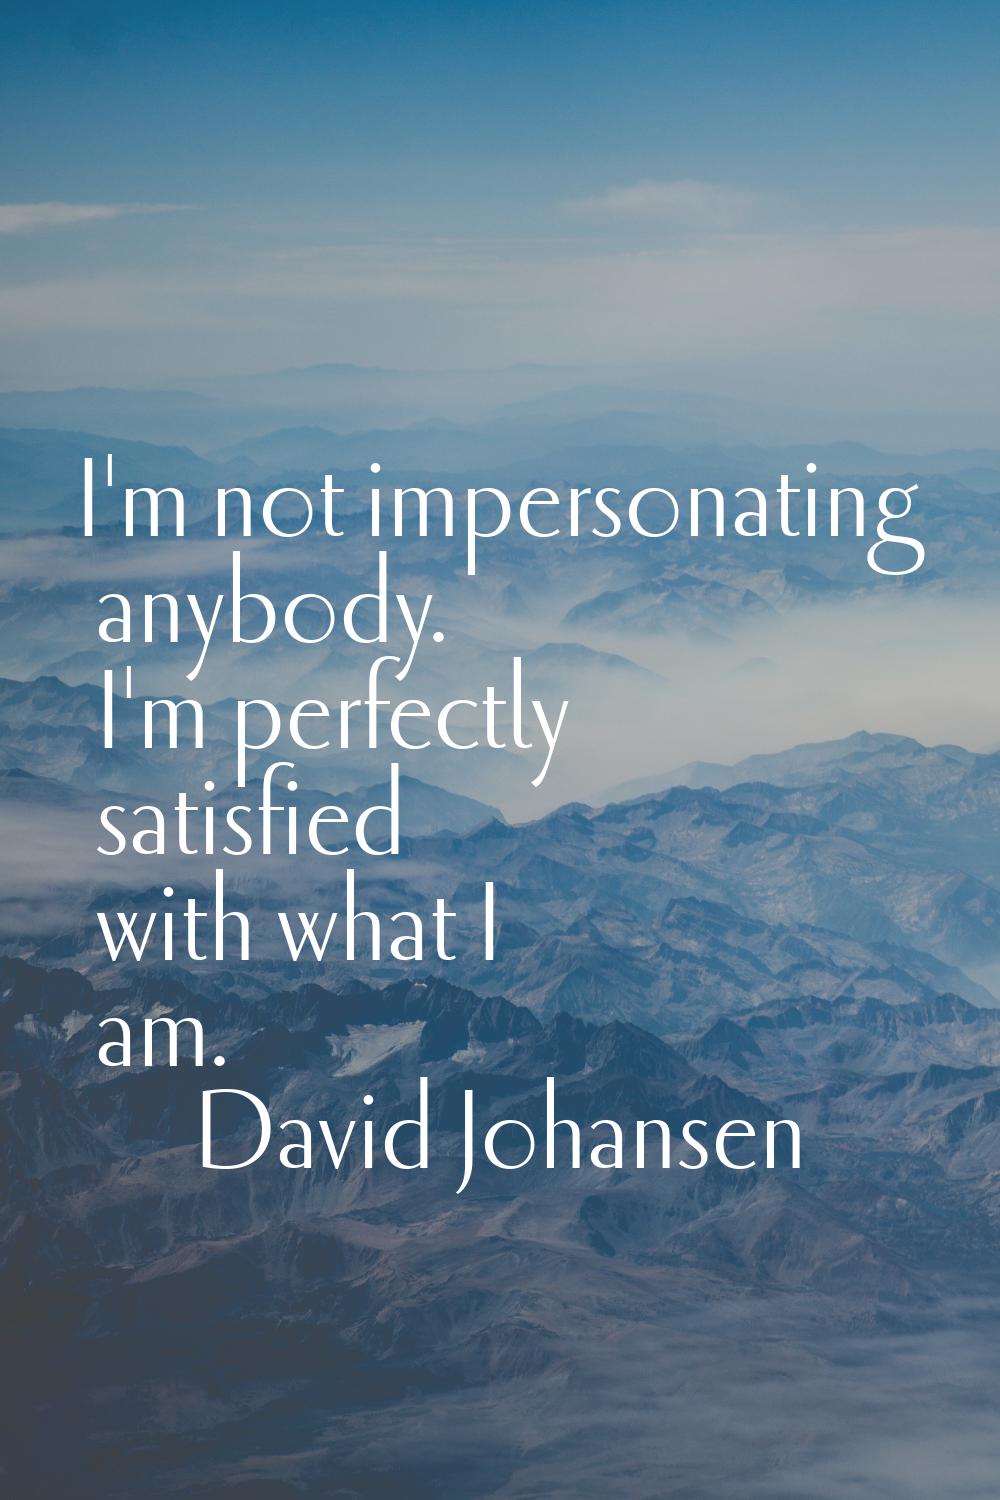 I'm not impersonating anybody. I'm perfectly satisfied with what I am.